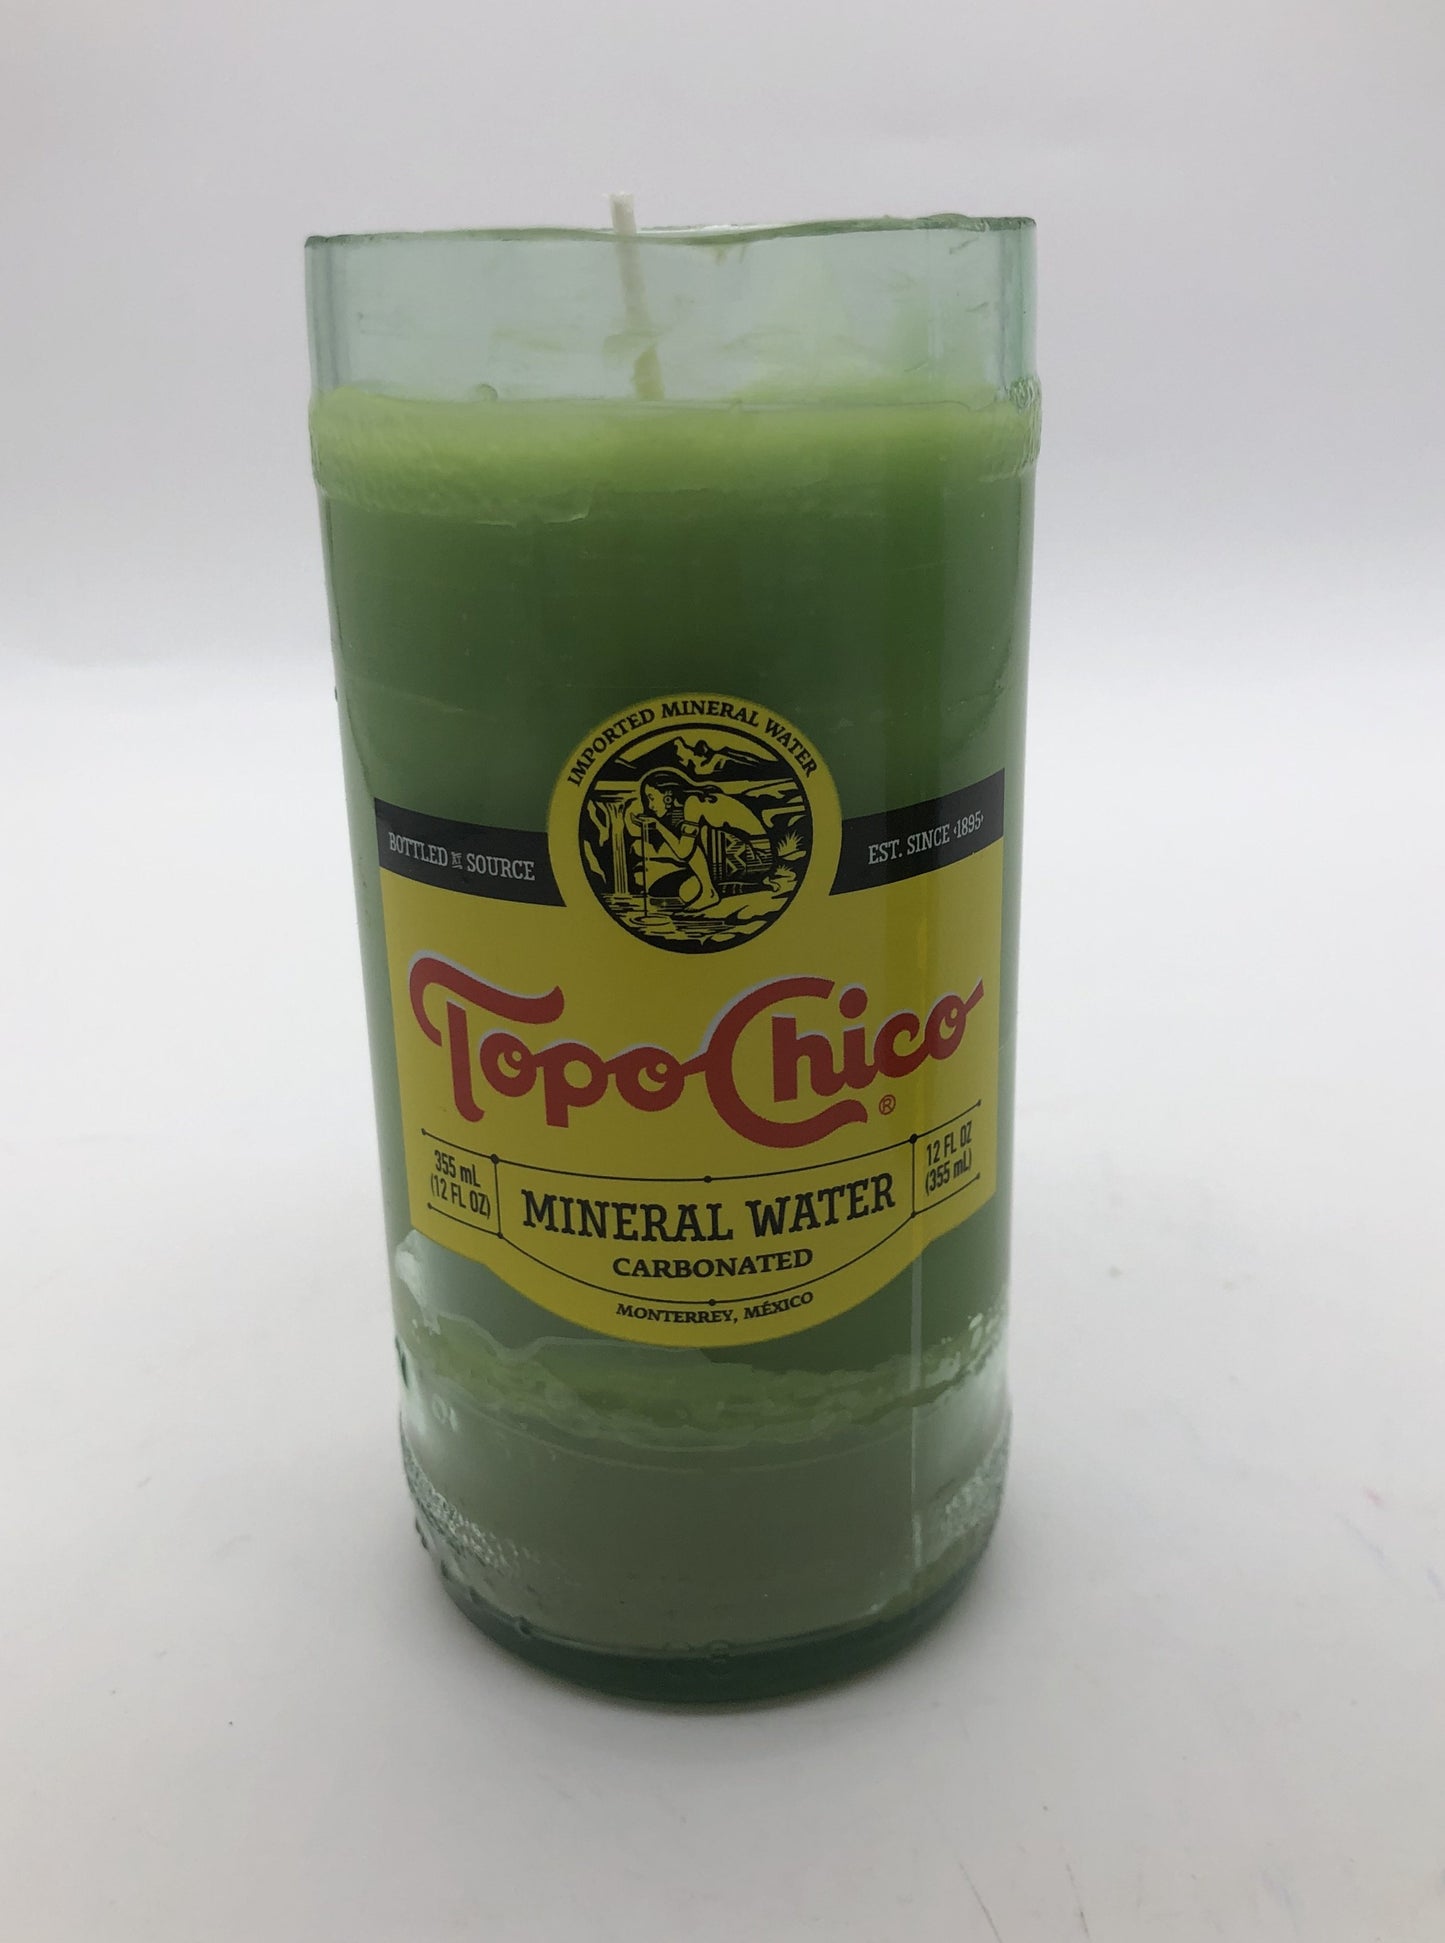 Cut clear bottle of Topo Chico with light green candle inside.